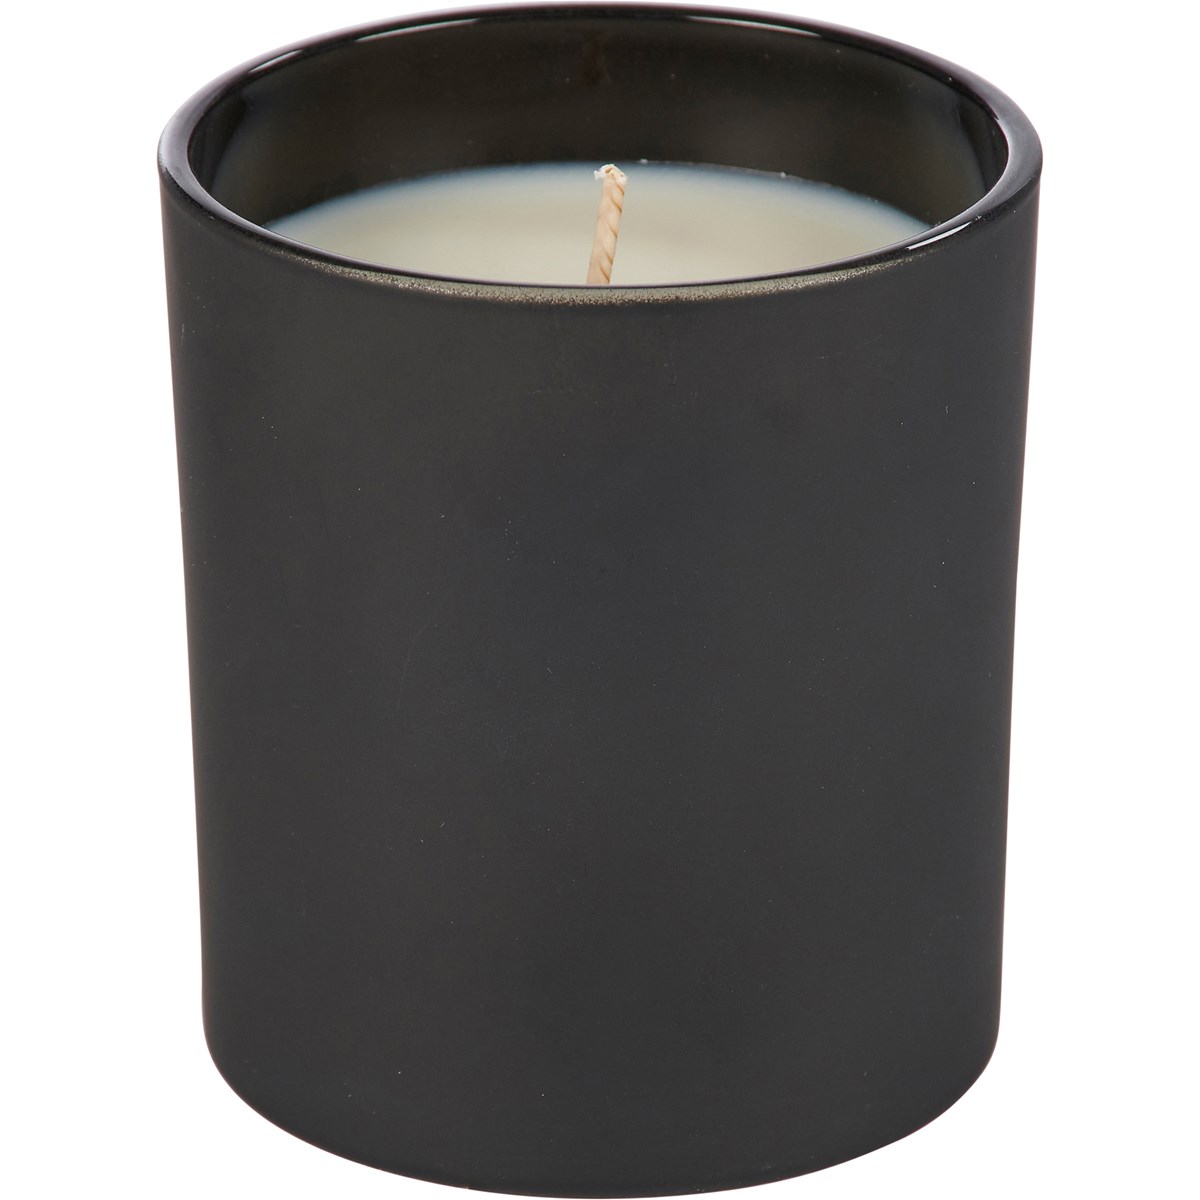 Life Is Better On The Farm Candle - Soy Wax, Glass, Cotton